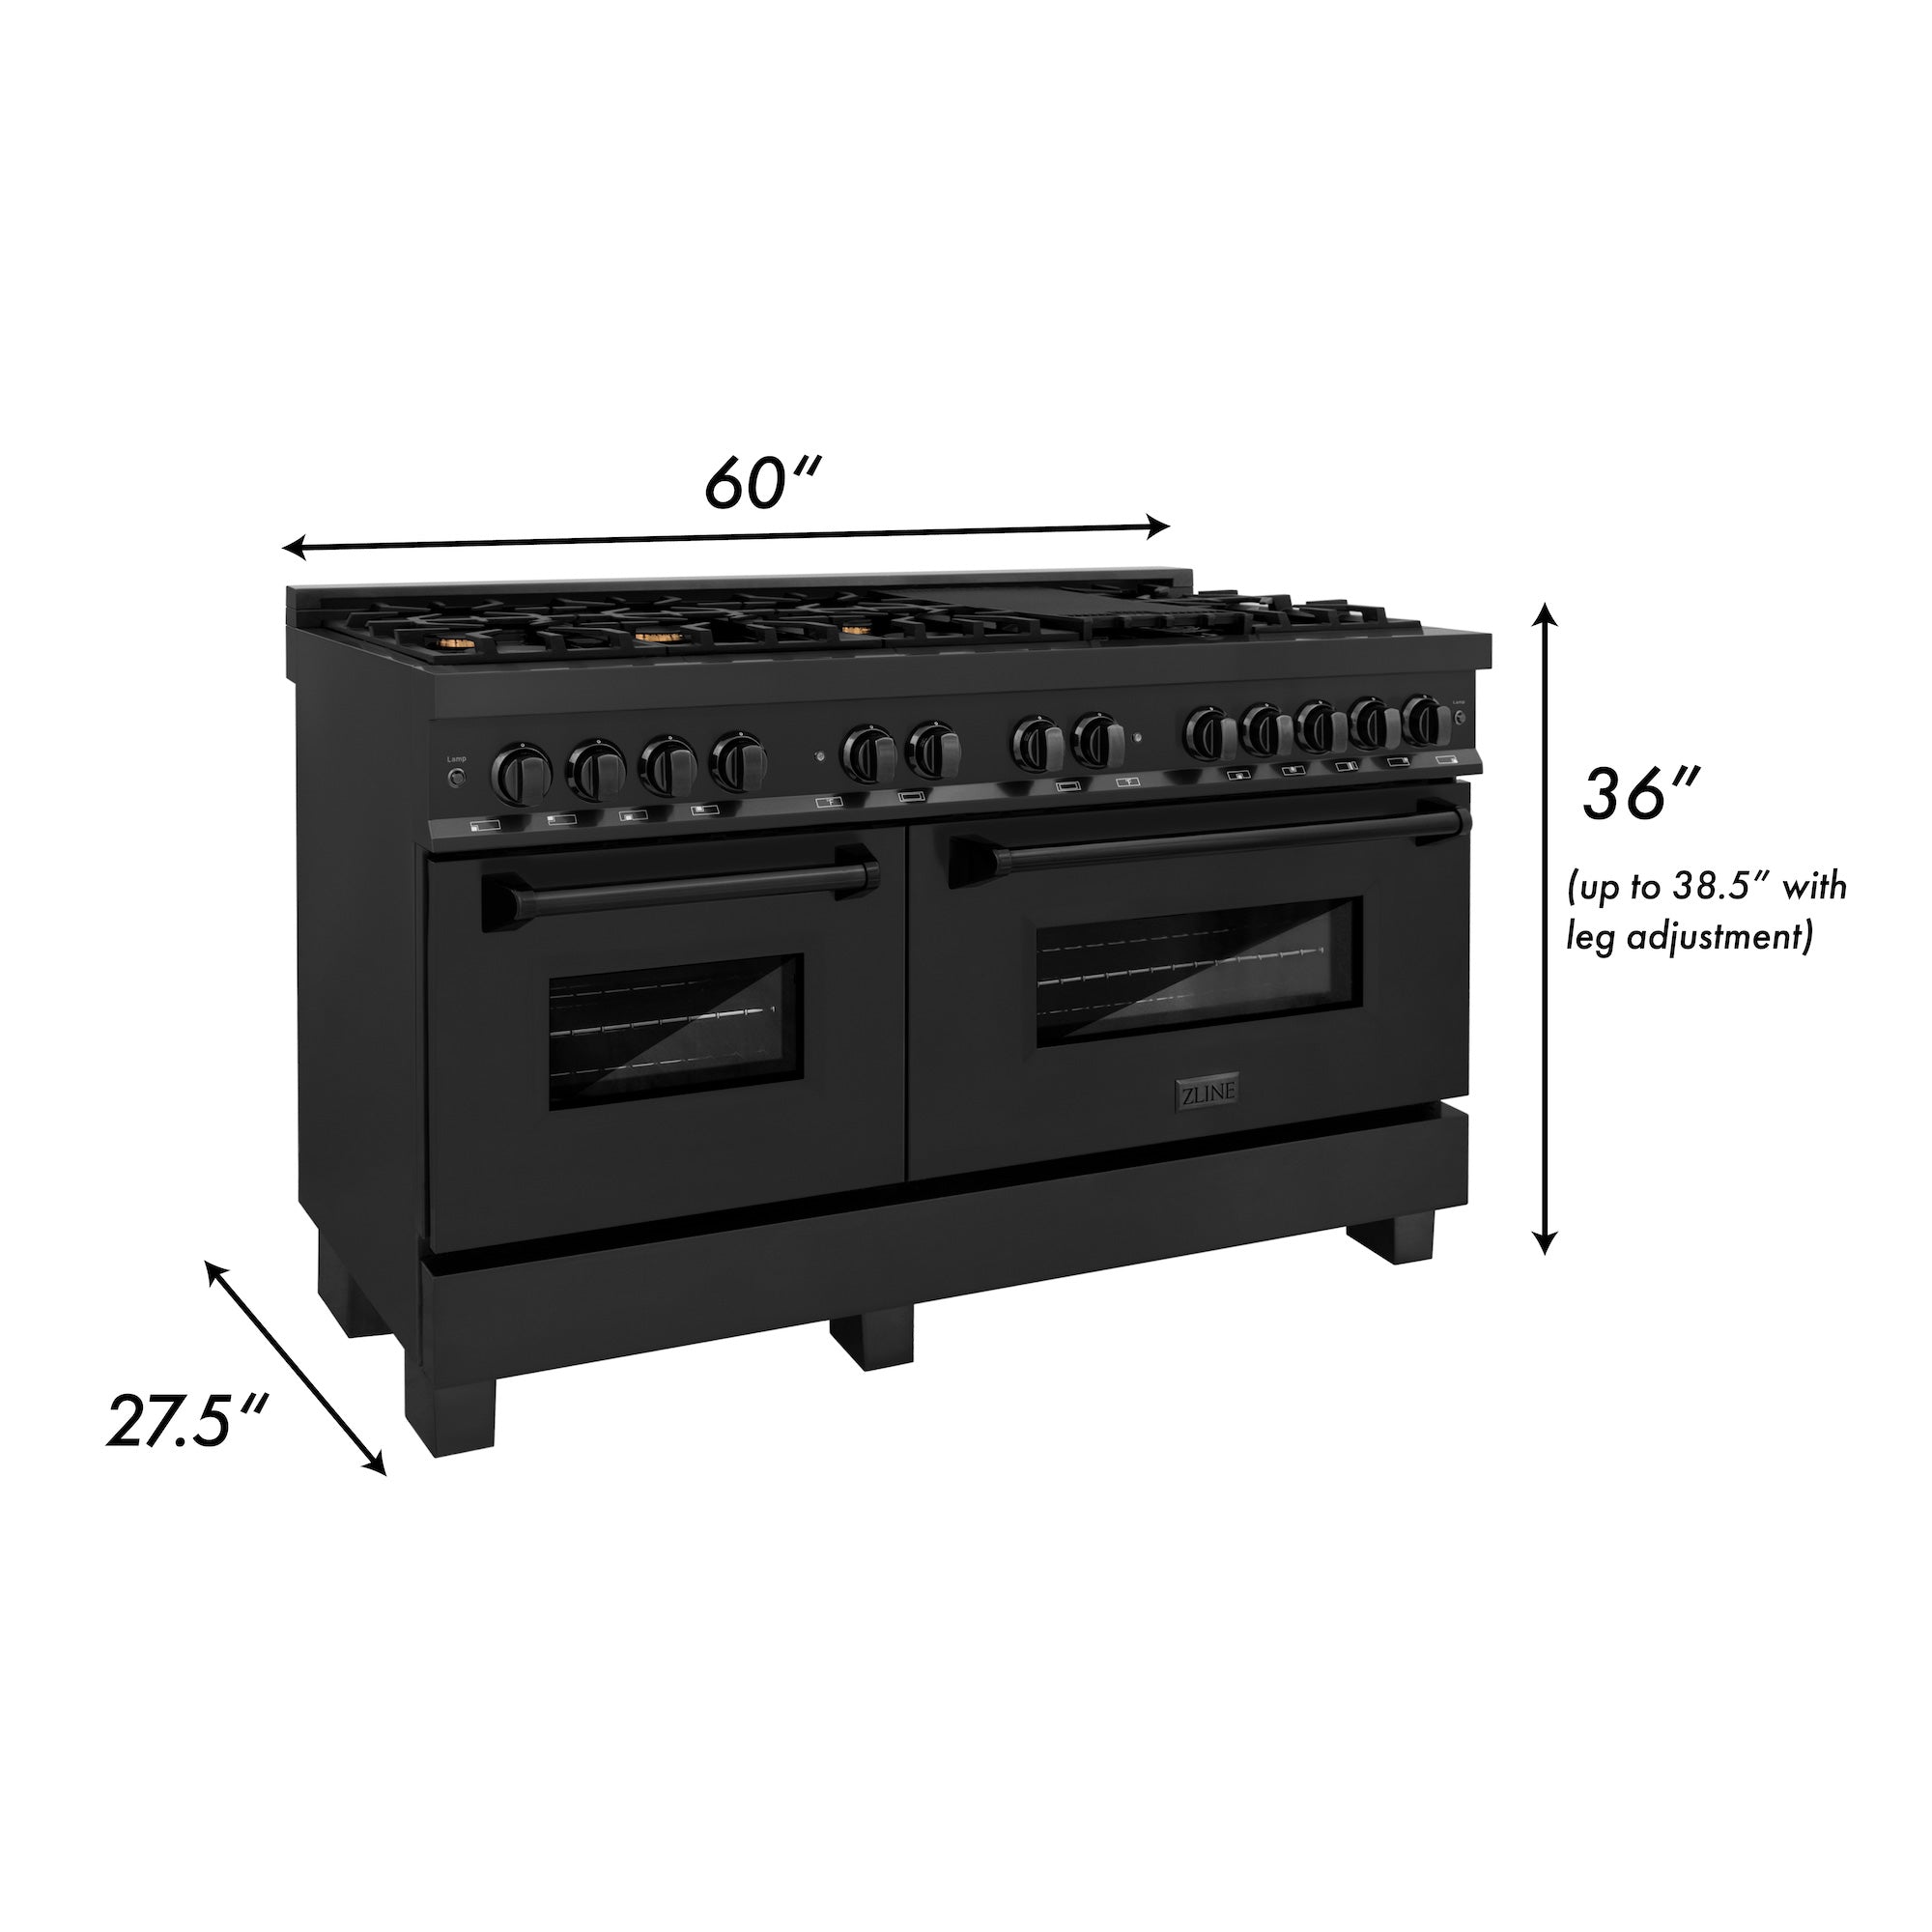 ZLINE 60 in. 7.4 cu. ft. Dual Fuel Range with Gas Stove and Electric Oven in Black Stainless Steel with Brass Burners (RAB-60) - New Star Living